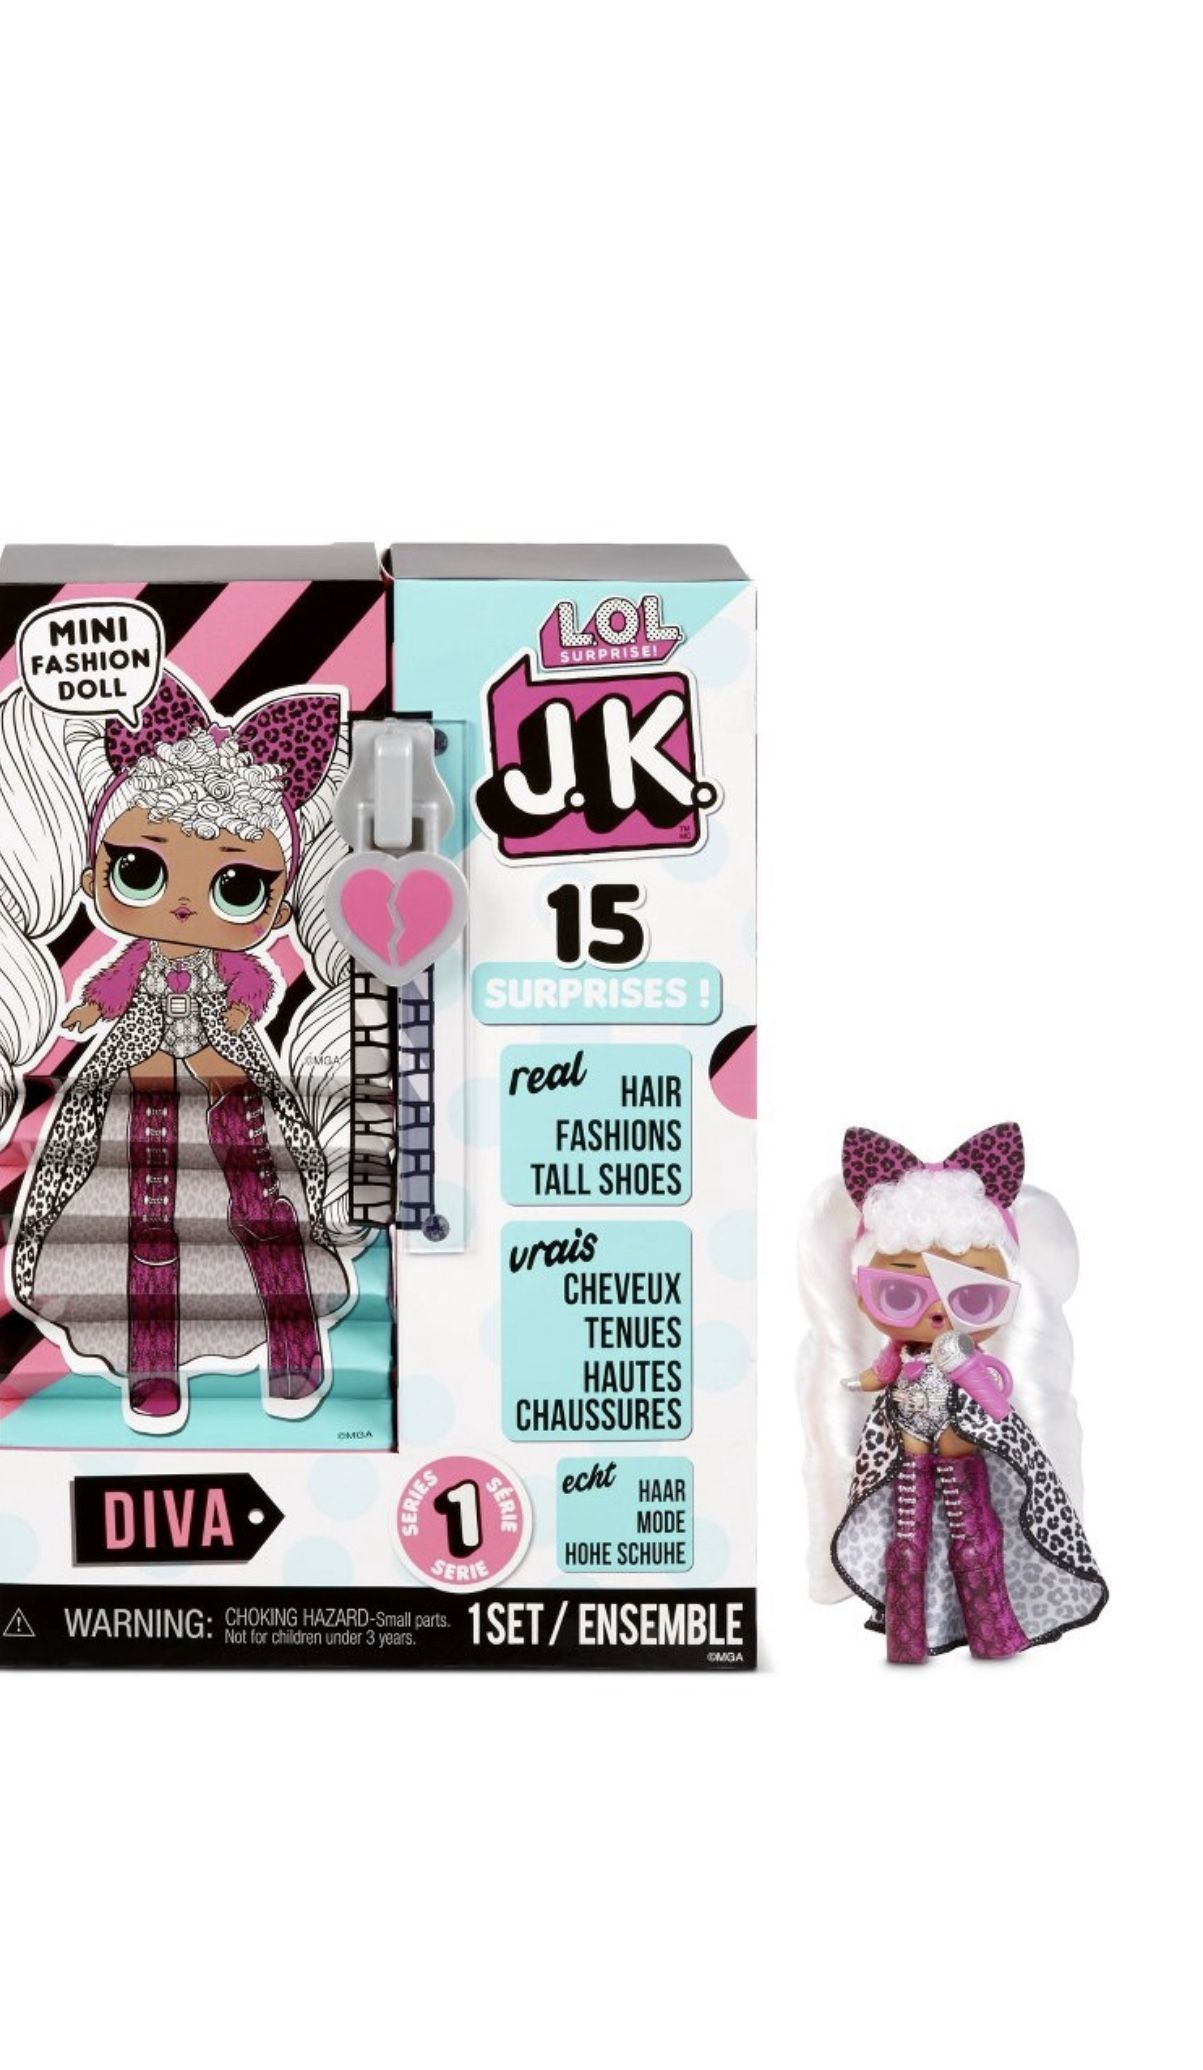 LOL Surprise JK Mini Fashion Doll Diva with 15 Surprises Including Dress Up Doll Outfits, Exclusive Doll Accessories - Gifts for Girls and Mix Match T